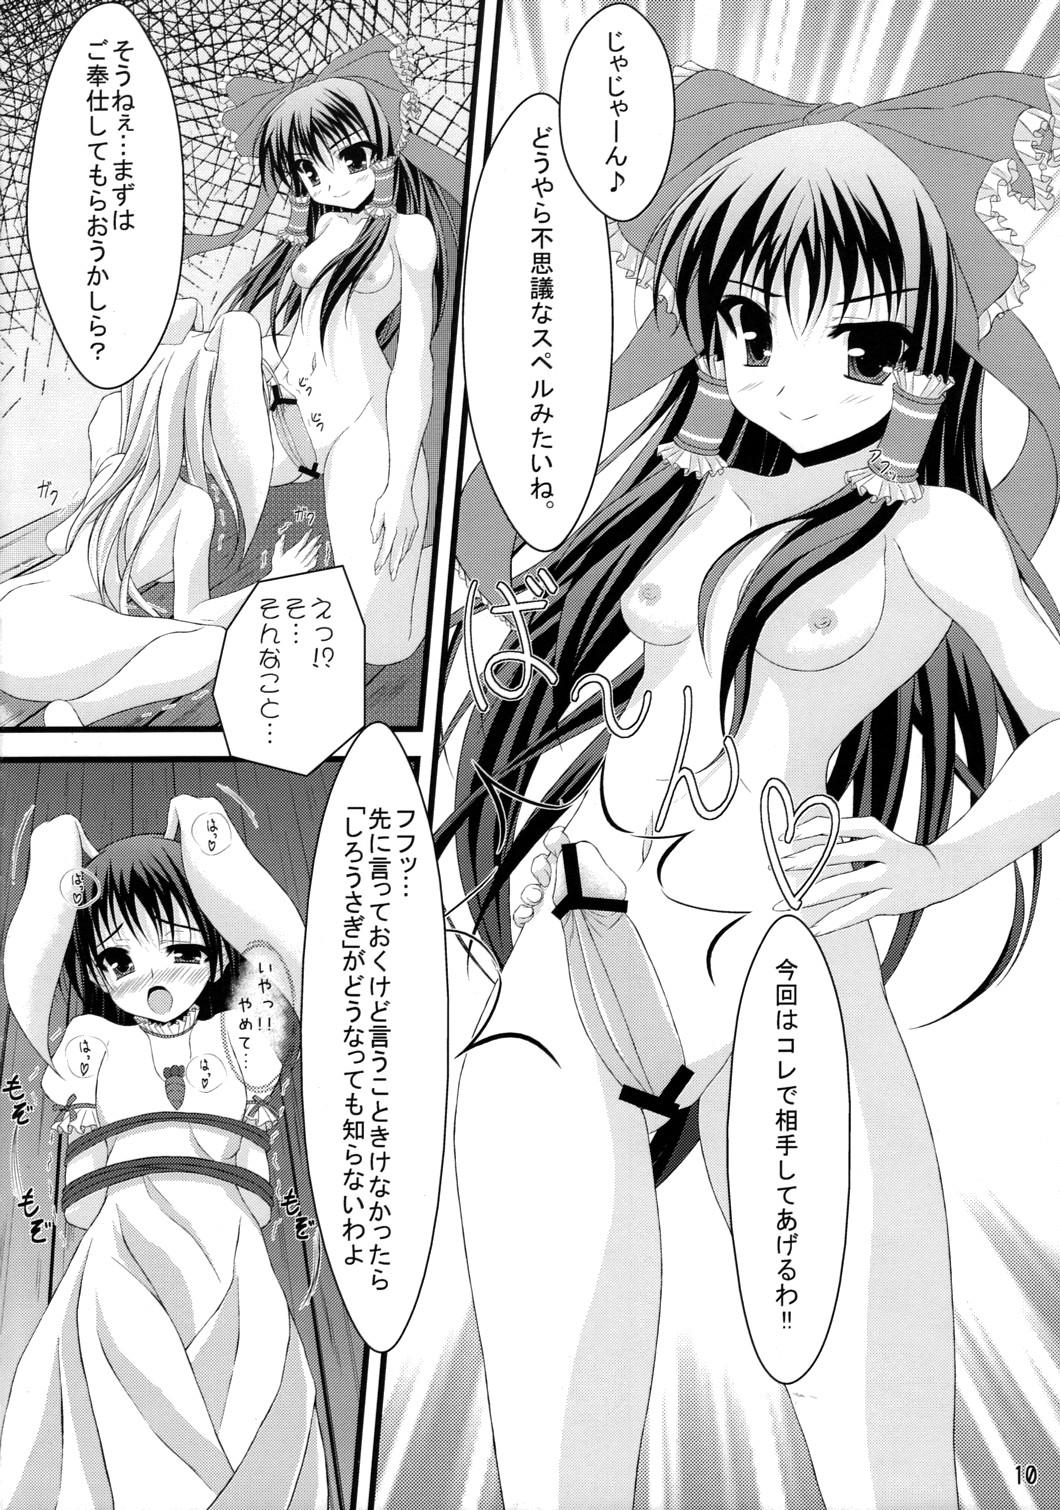 Shoplifter Tele-Mesmerism - Touhou project Groping - Page 9